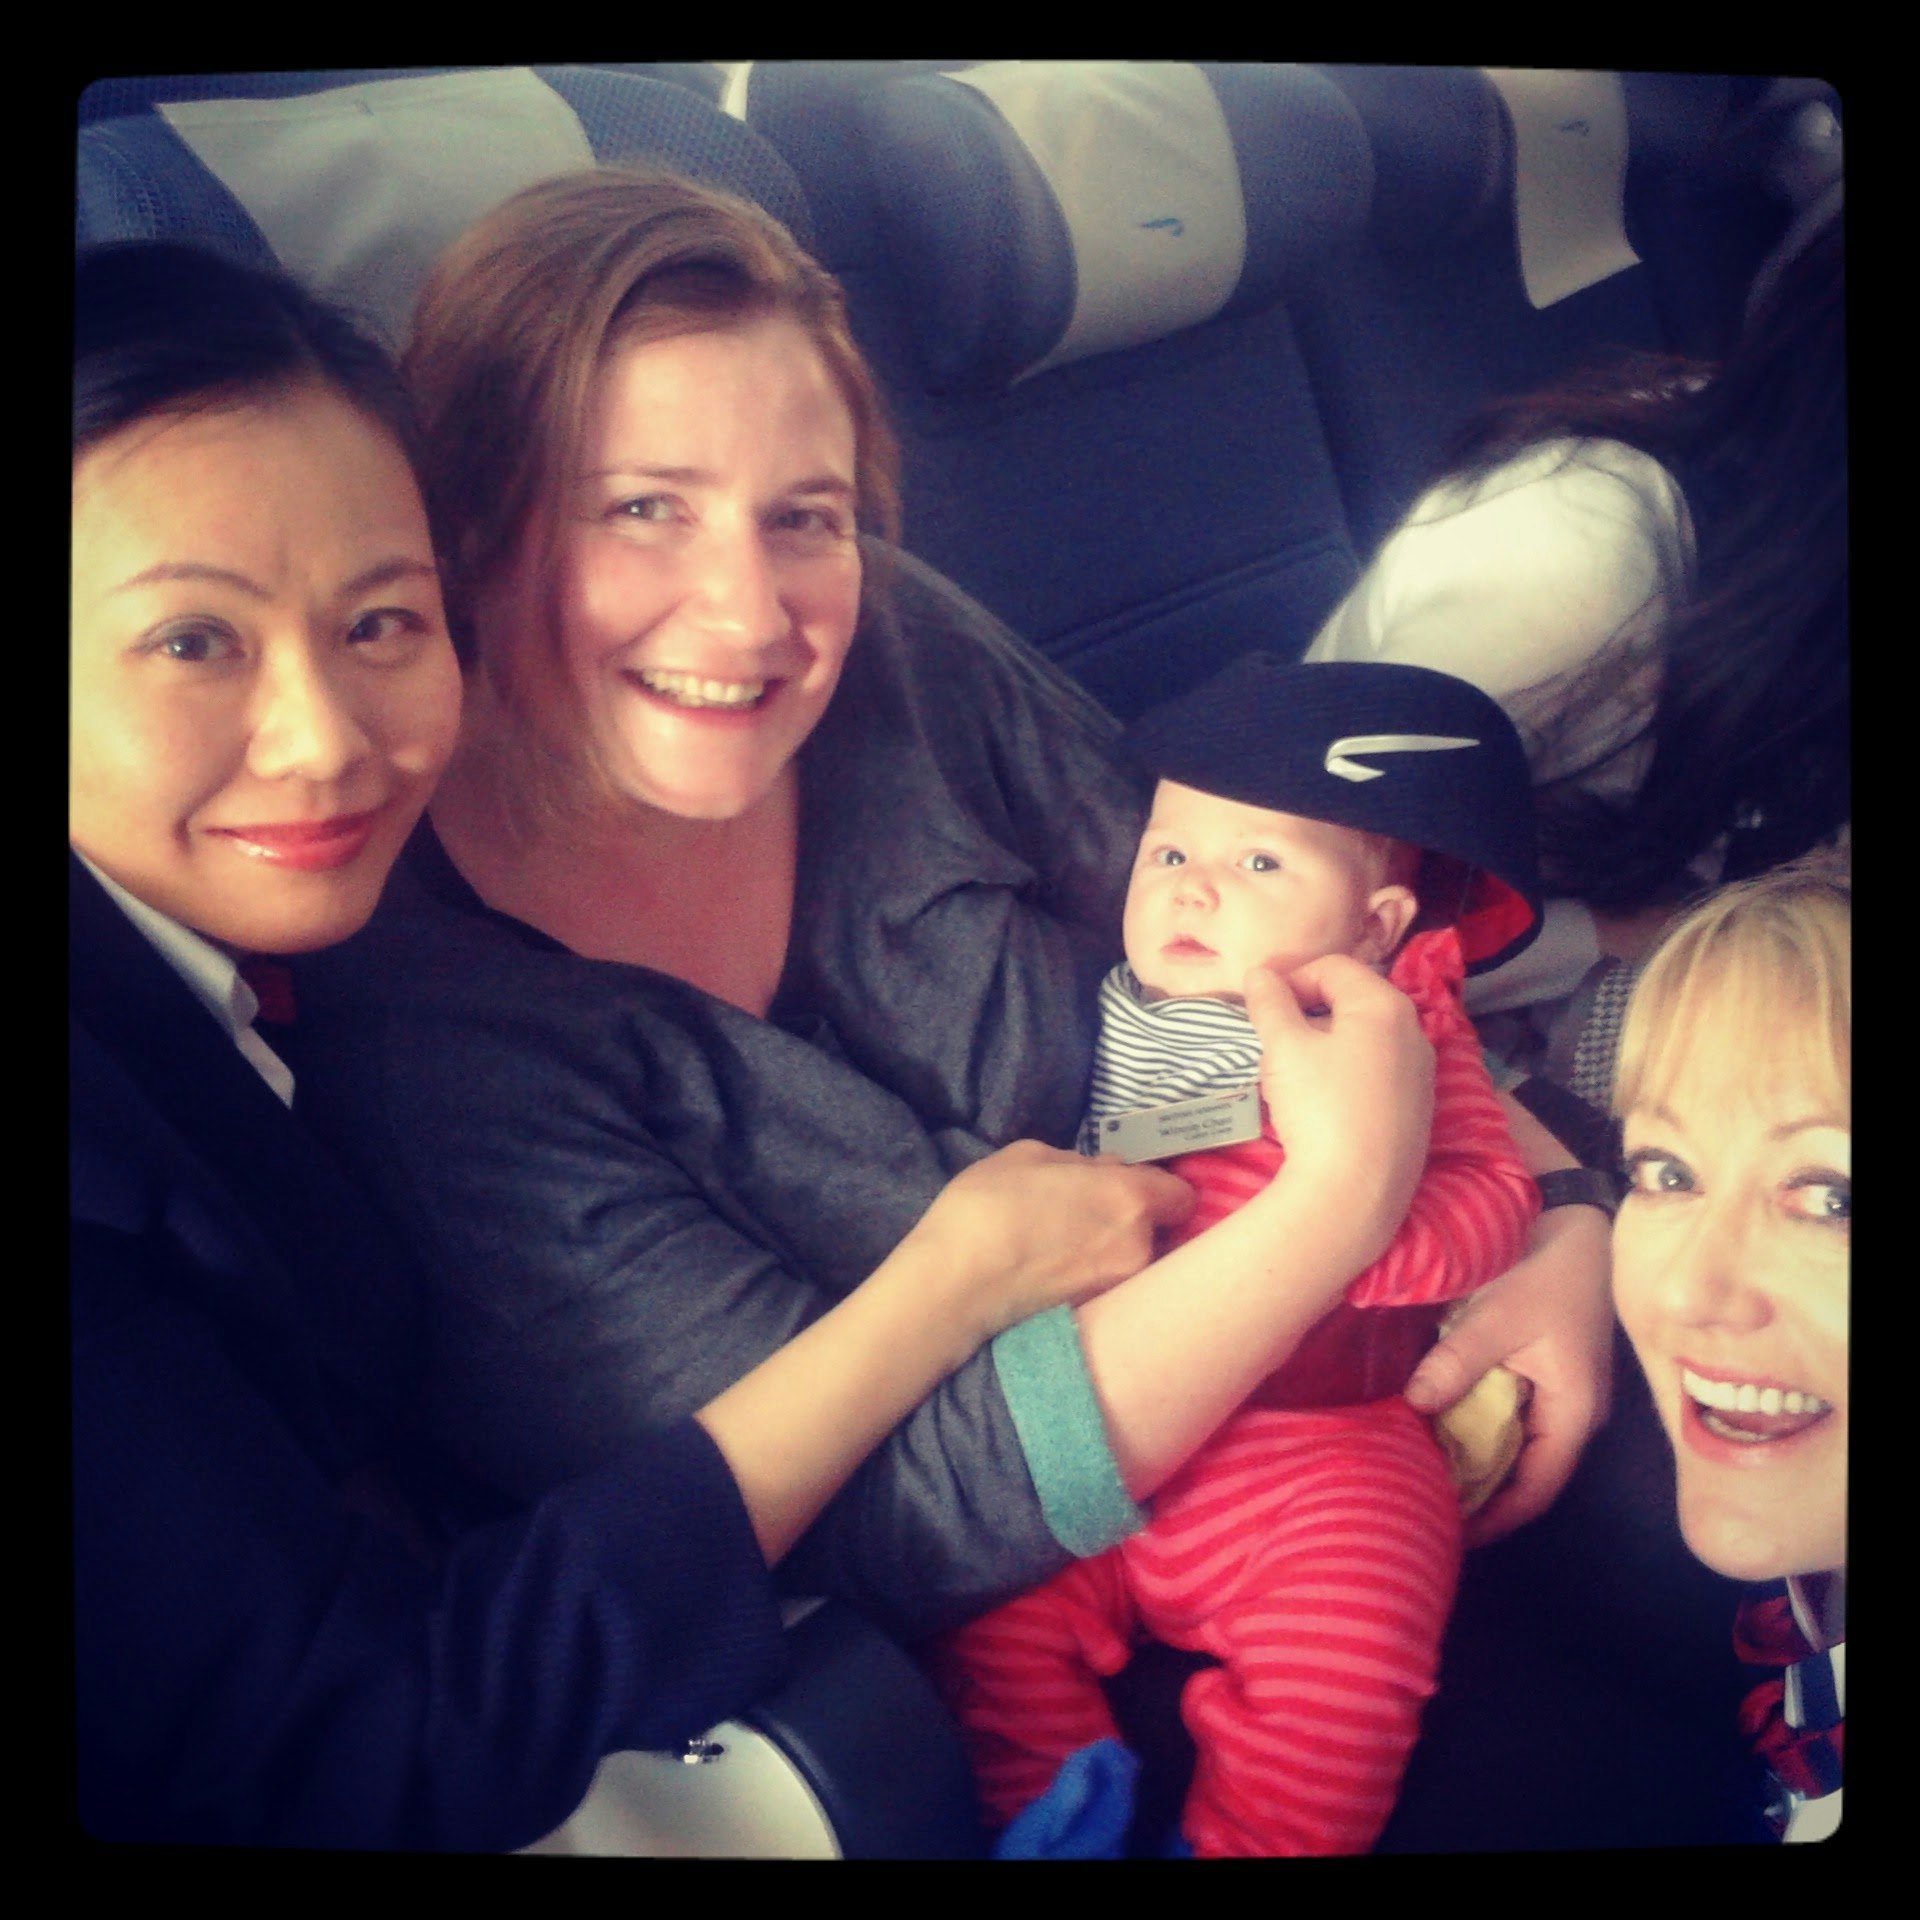 The writer sits with her baby in an airplane seats, flanked by two female air stewards smiling for the camera.